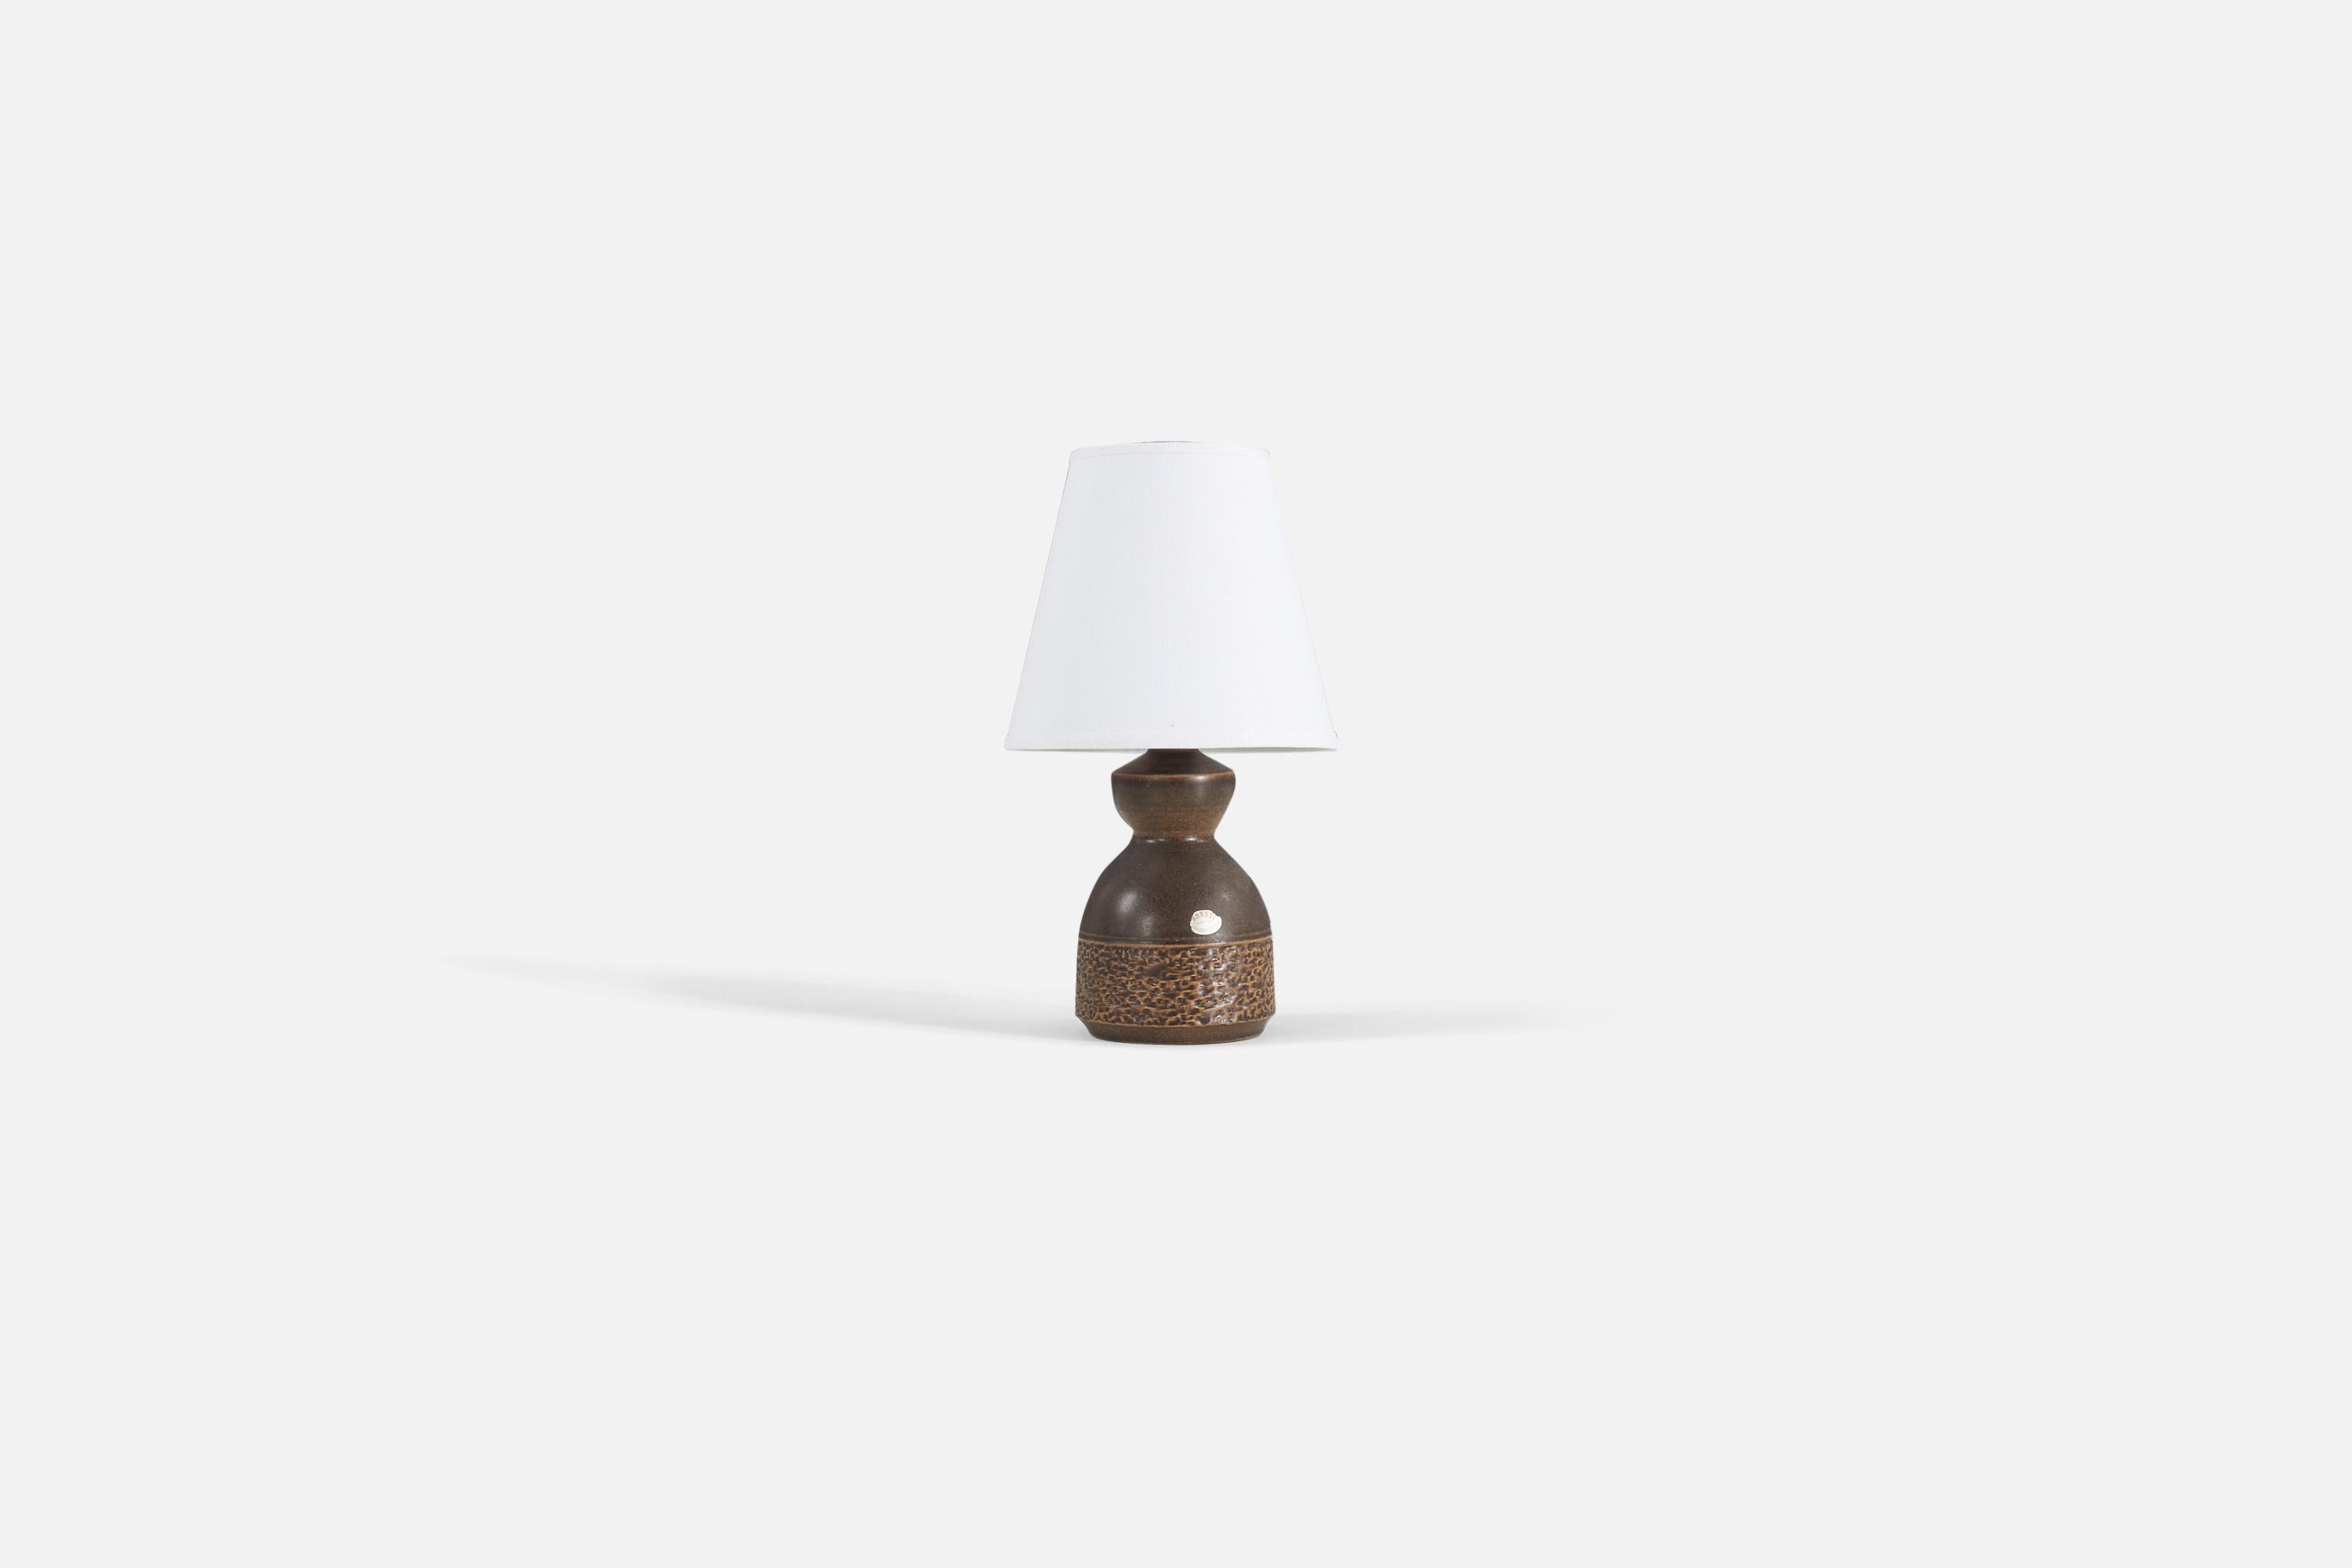 A brown stoneware table lamp designed by Henry Brandi, and produced by his own firm, Brandi Vejbystrand, Sweden, 1960s. Marked and labeled. 

Sold without lampshade. 

Measurements listed are of lamp.
Shade : 4 x 7 x 6.25 
Lamp with shade : 12